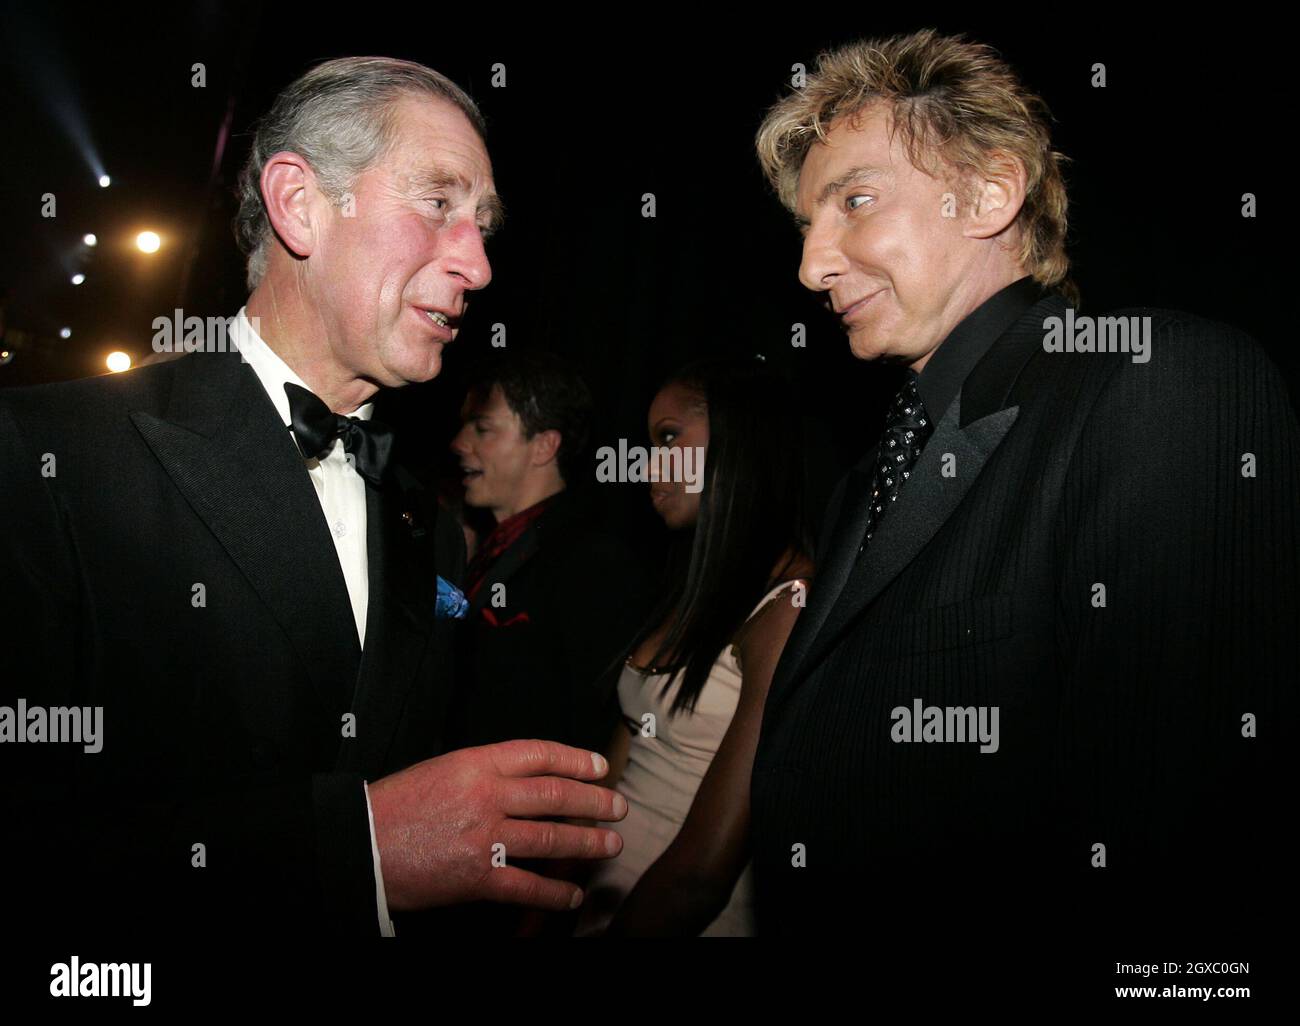 Prince Charles, Prince of Wales meets singer Barry Manilow backstage at The Royal Variety performance in London on December 4, 2006. Anwar Hussein/EMPICS Entertainment Stock Photo